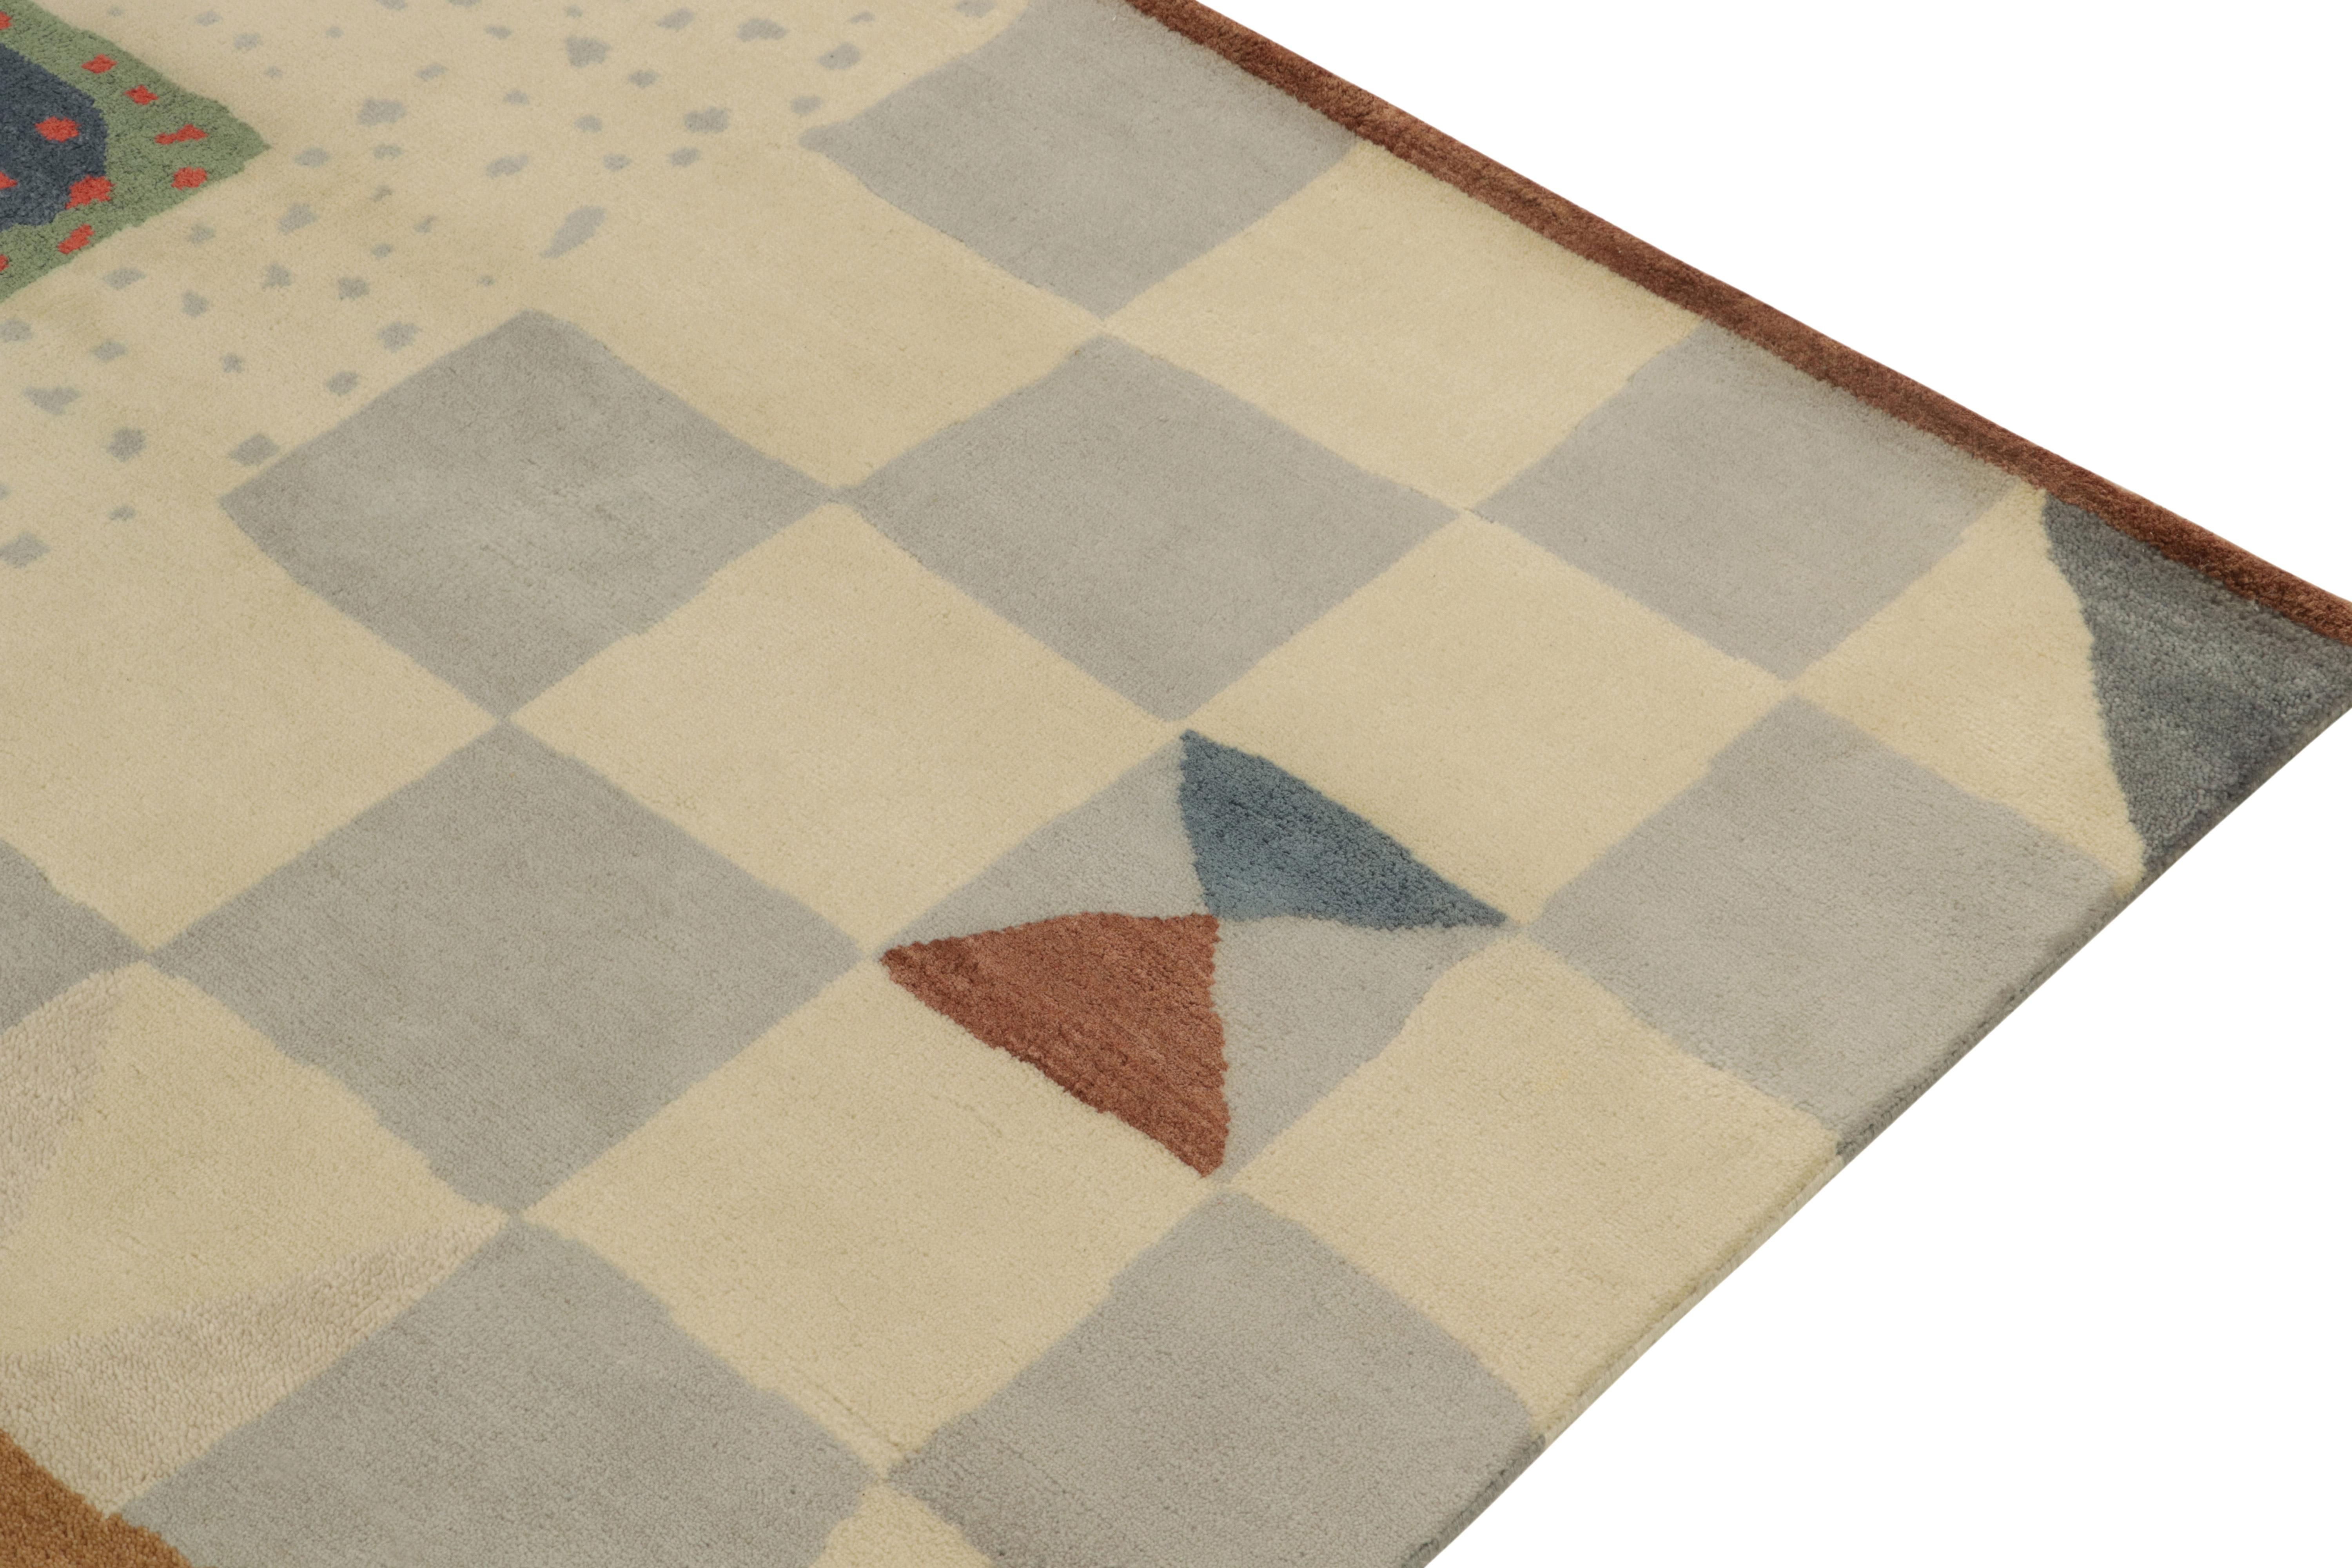 Indian Rug & Kilim’s Scandinavian style rug in Blue, White & Gray Geometric Patterns For Sale